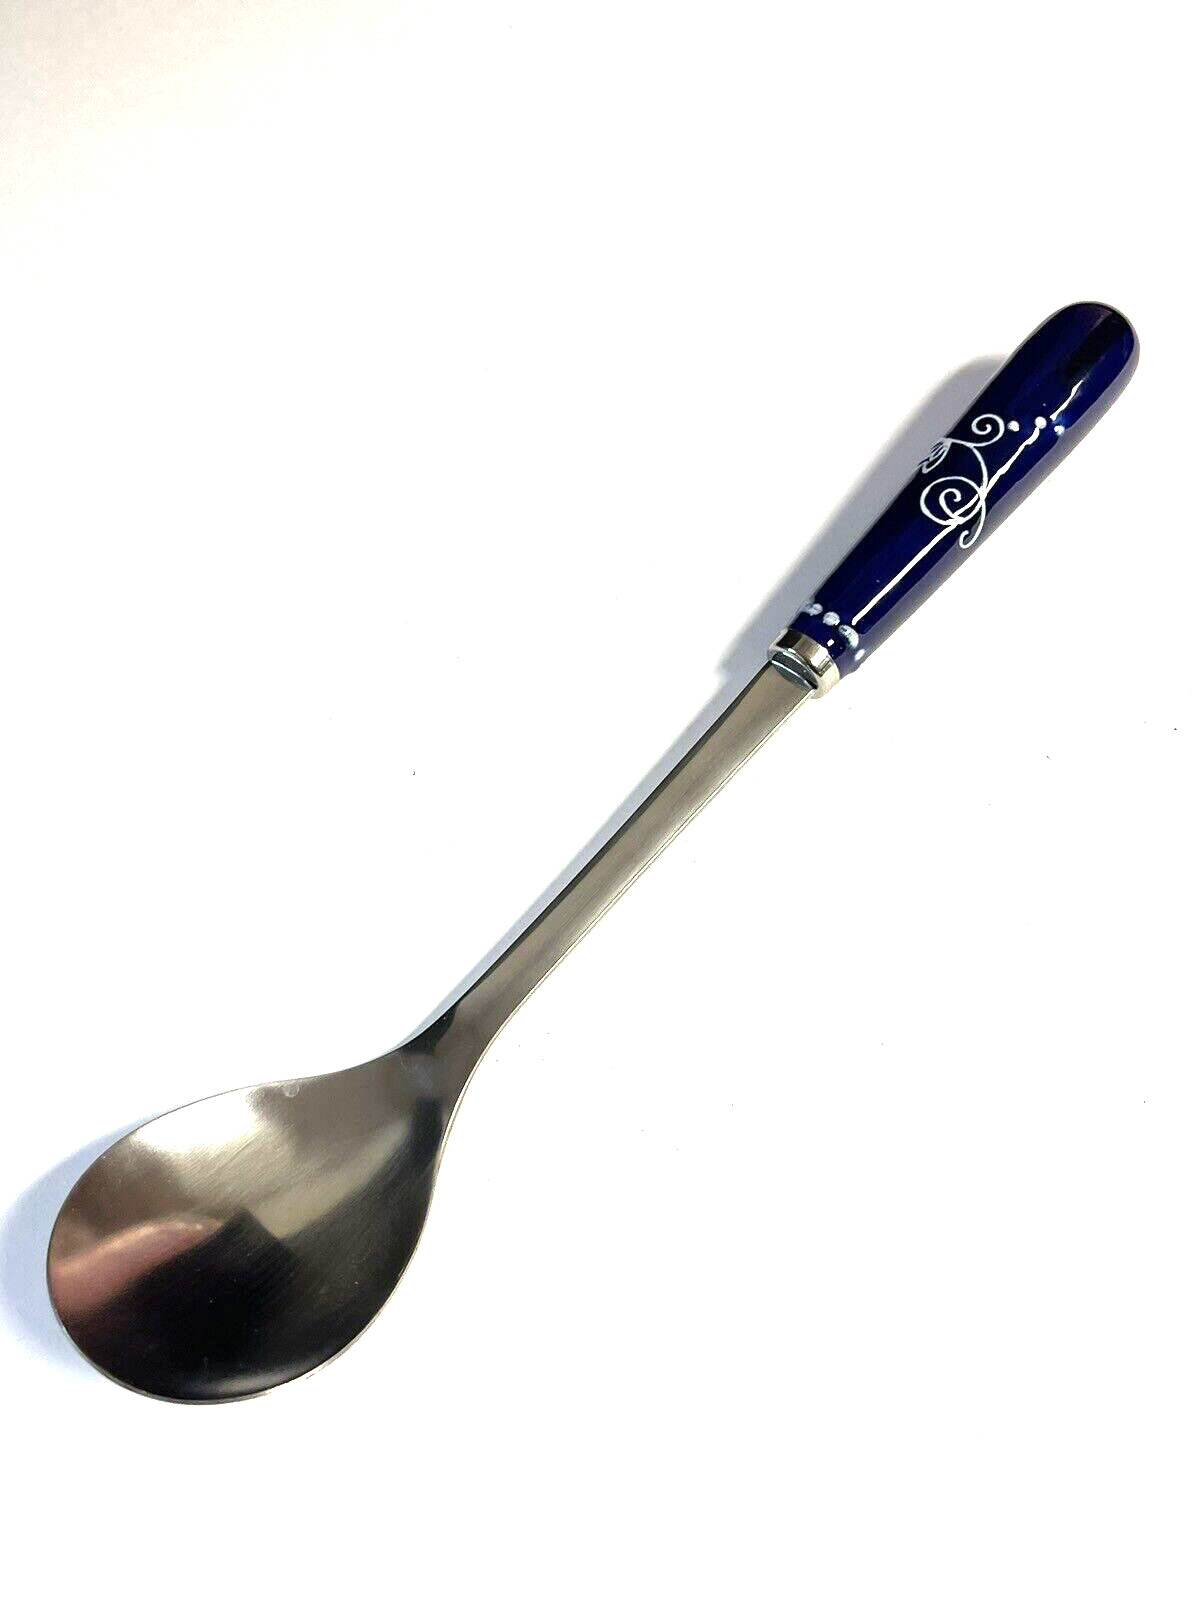 Temp-tations by Tara Old Porcelain Blue & White Handle 12” Large Serving Spoon